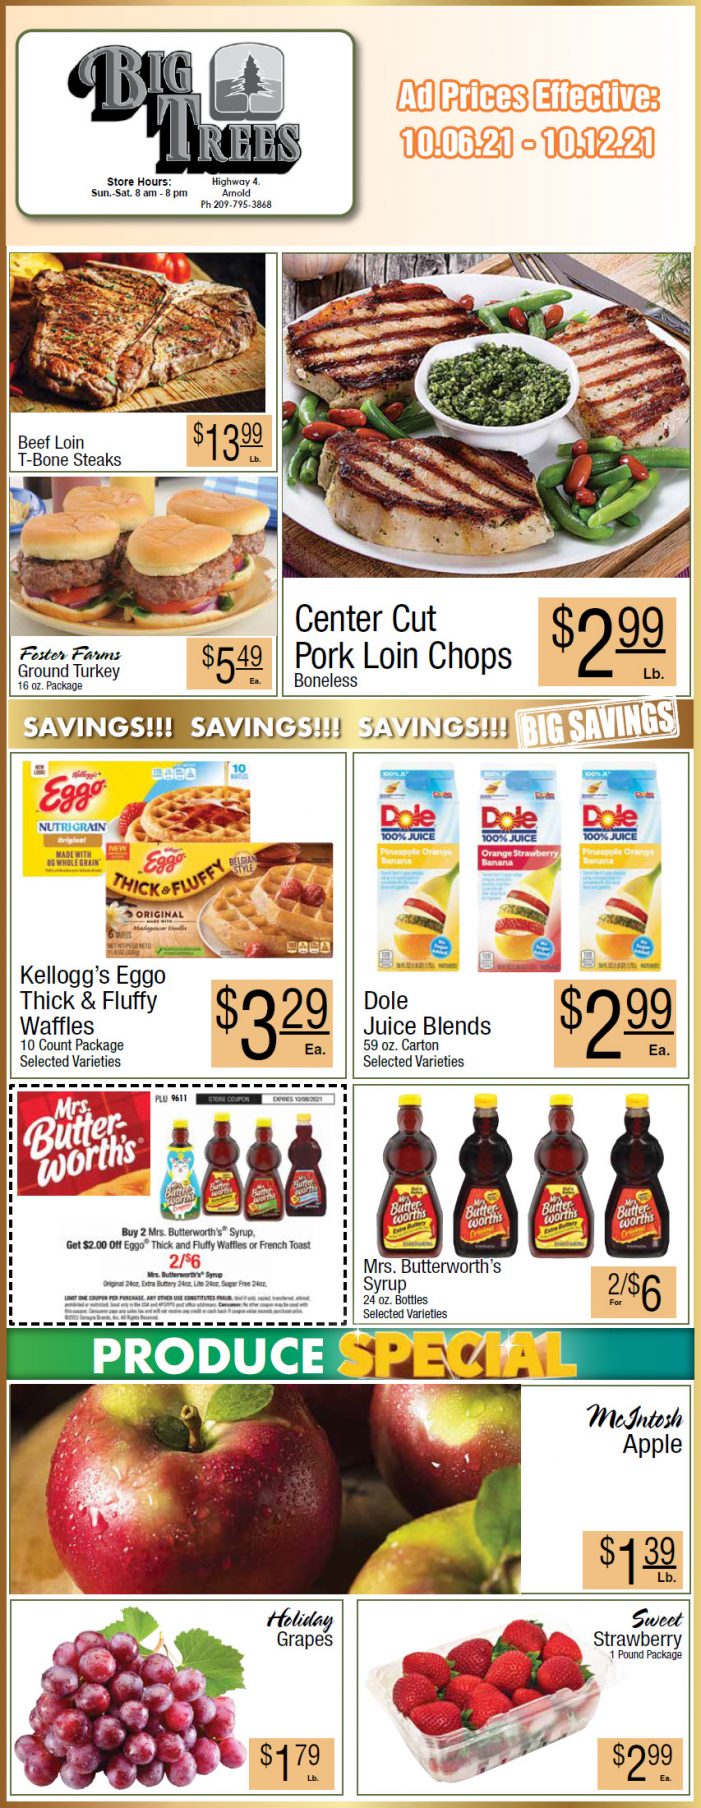 Big Trees Market Weekly Ad & Grocery Specials Through October 12th! Shop Local & Save!!